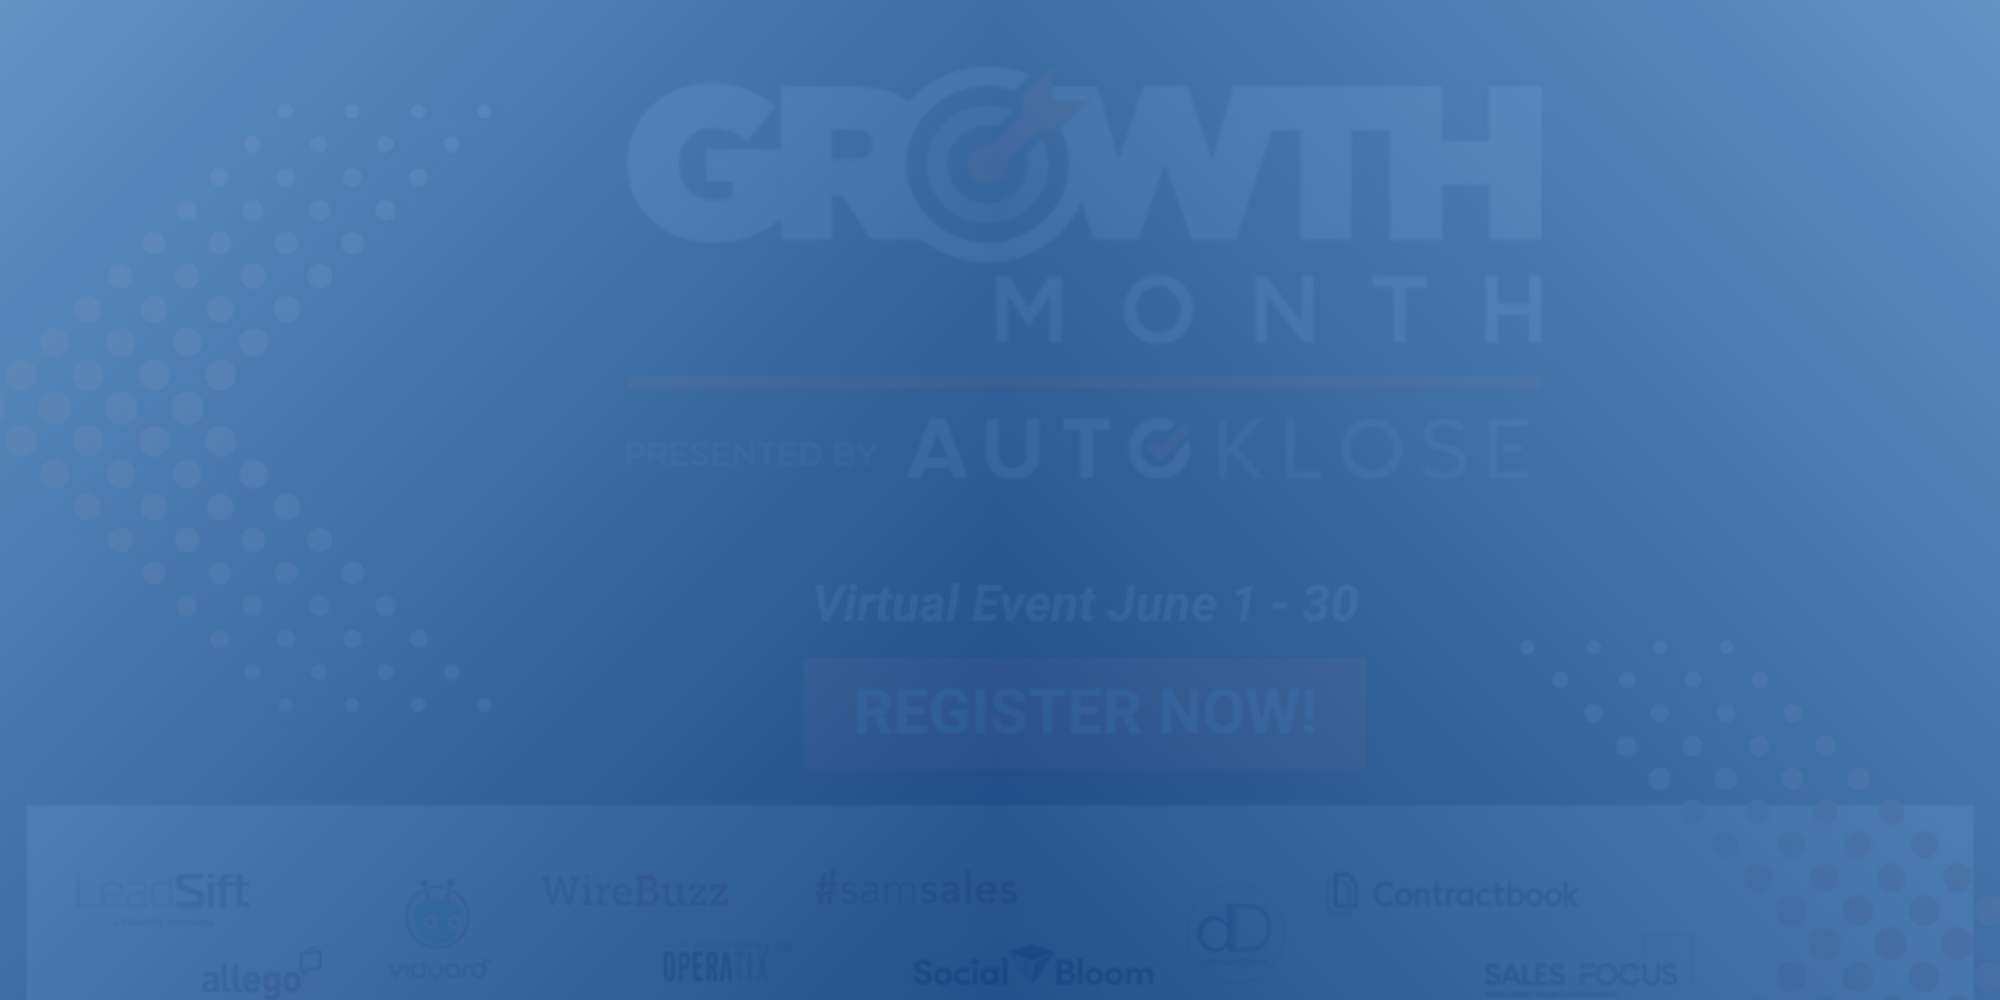 growth month - blue background